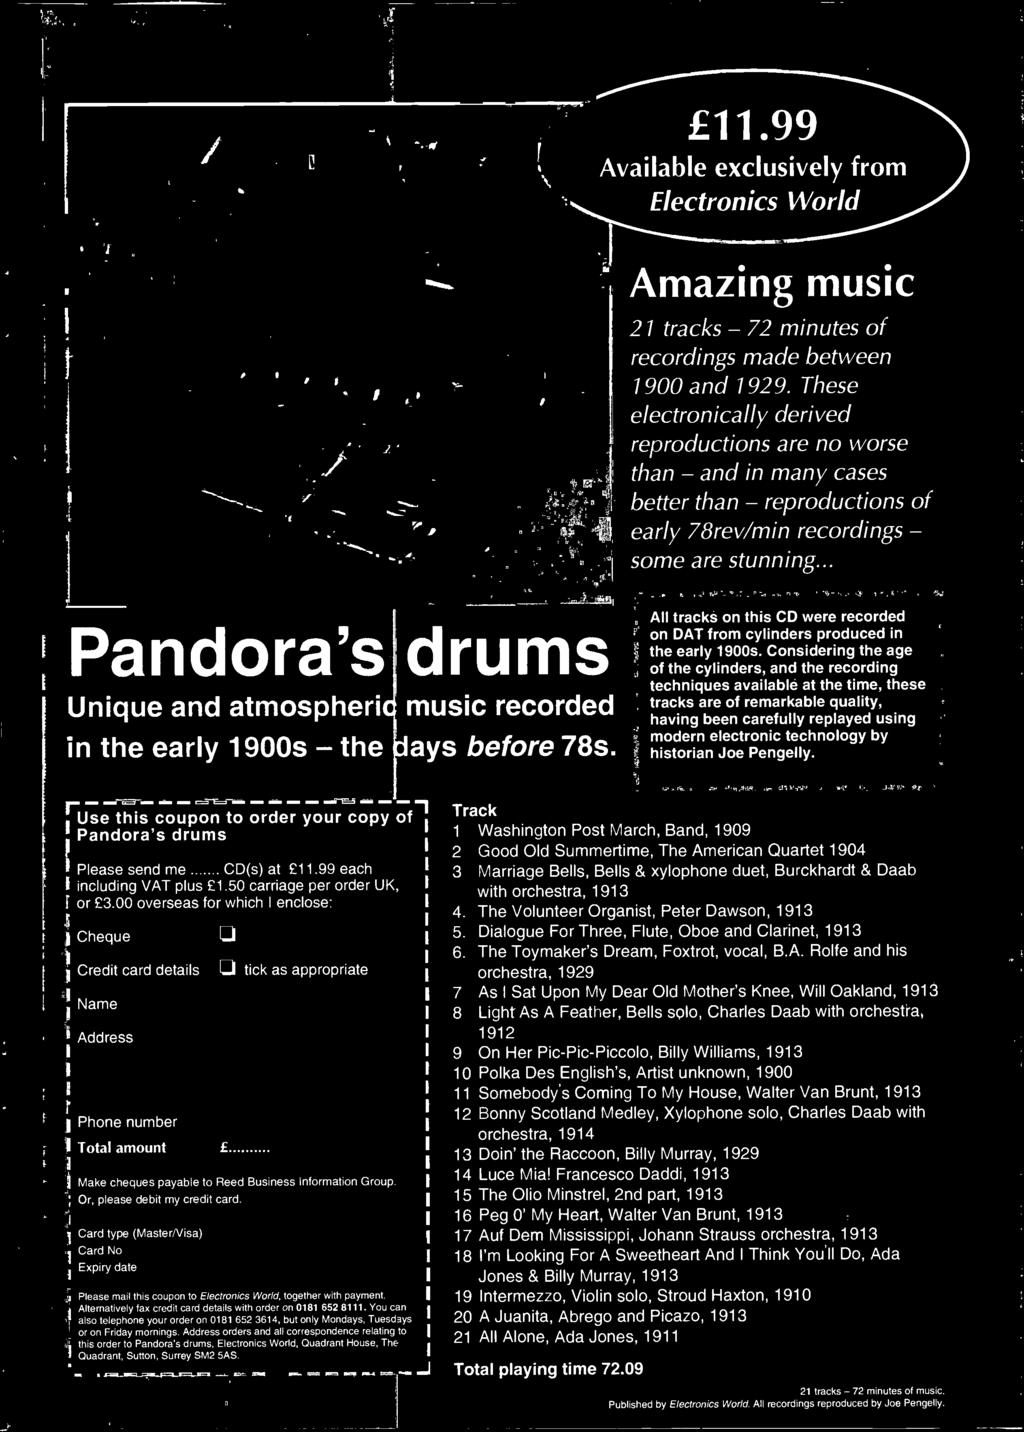 historian Joe Pengelly. ruse this coupon to order your copy of1 Pandora's drums / Please send me CD(s) at 11.99 each / including VAT plus 1.50 carriage per order UK, or 3.